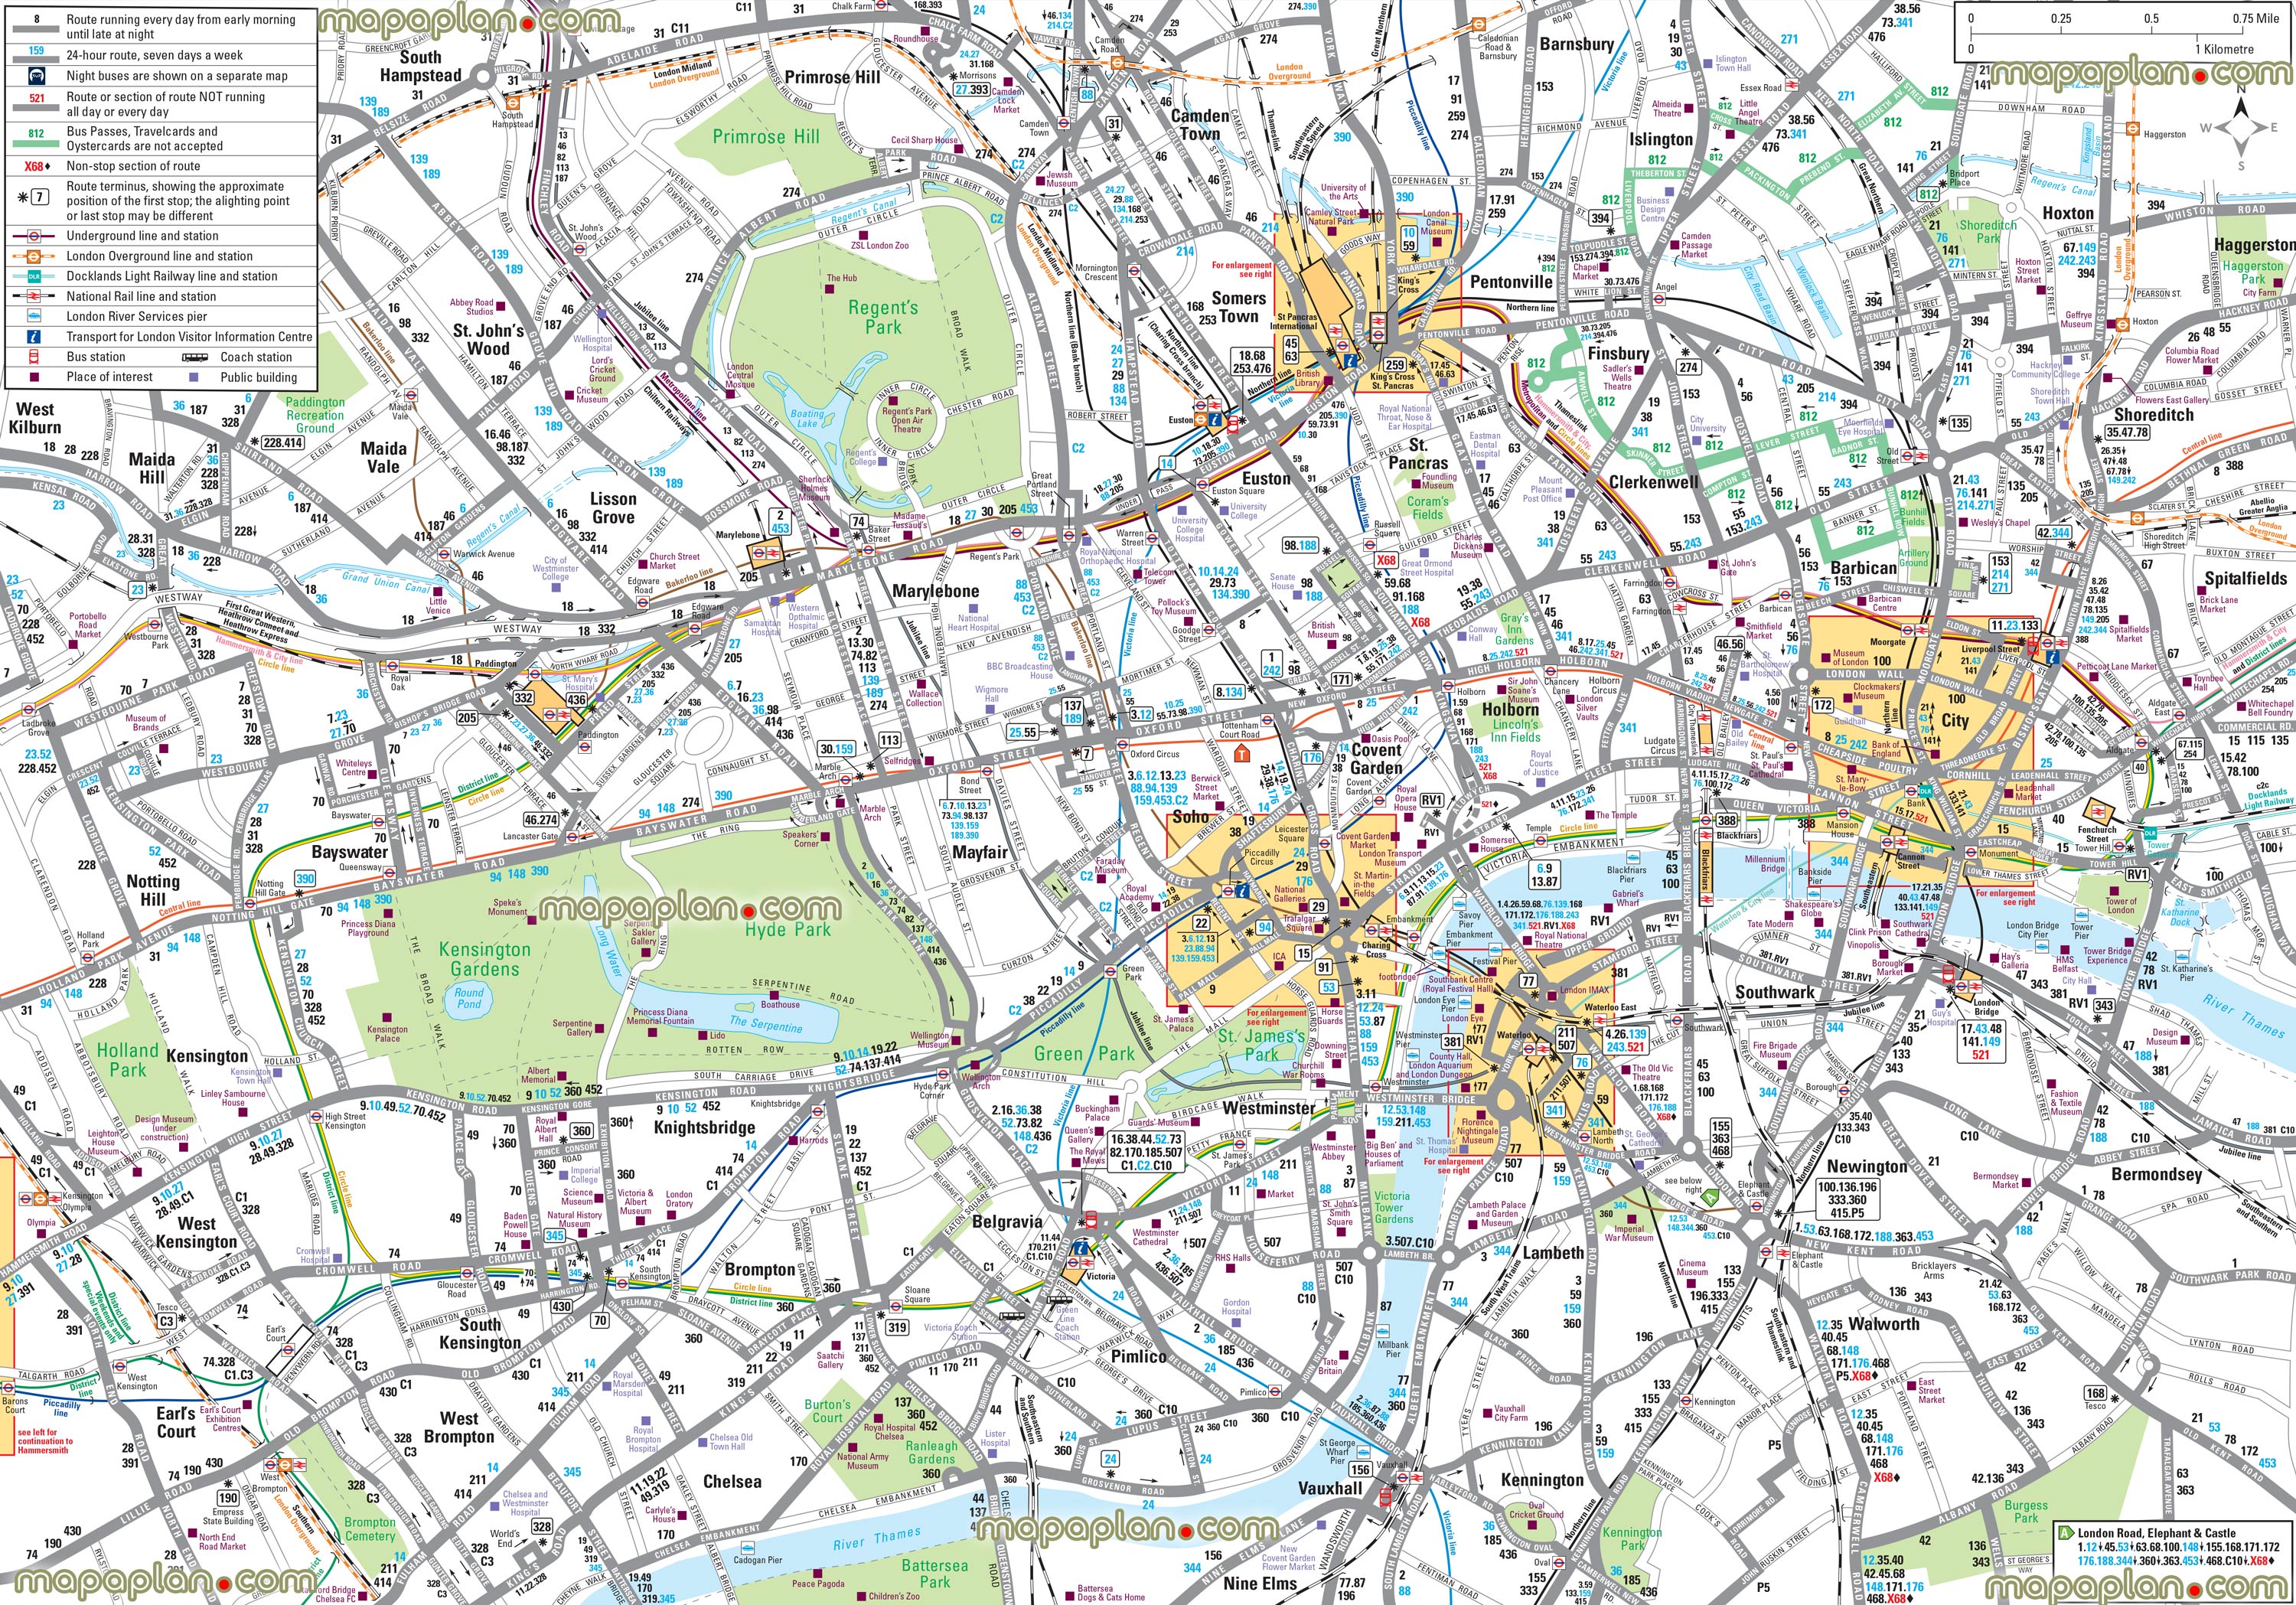 London map - Detailed map of central London (England) bus & tube public